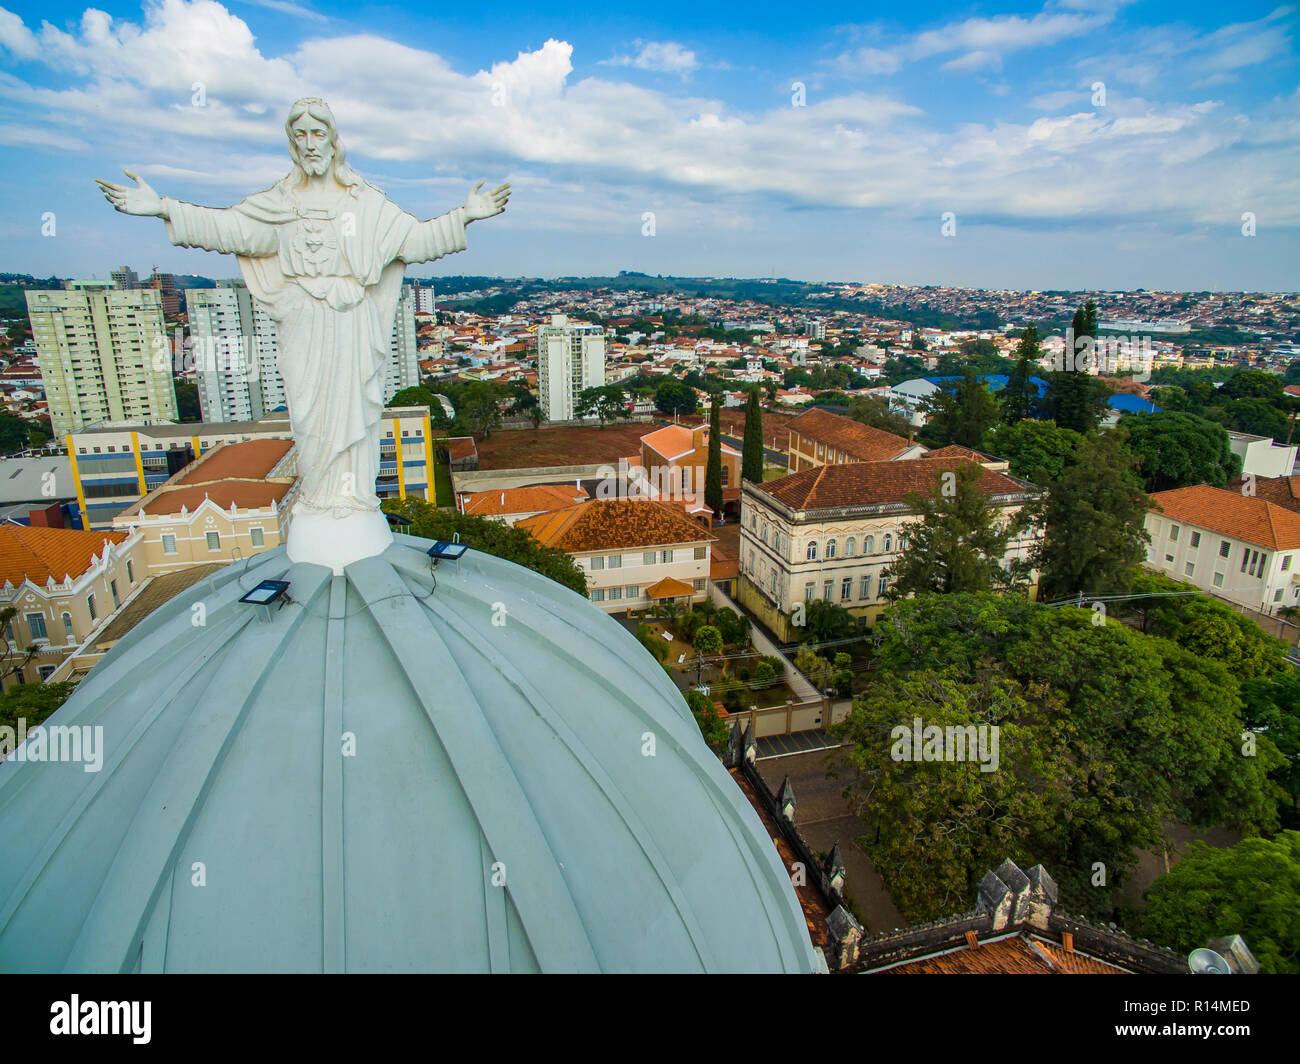 Statue of Jesus Christ on top of the Catholic Church, Cathedral of Sant'Ana, City of Botucatu, Sao Paulo State Brazil South America. Stock Photo